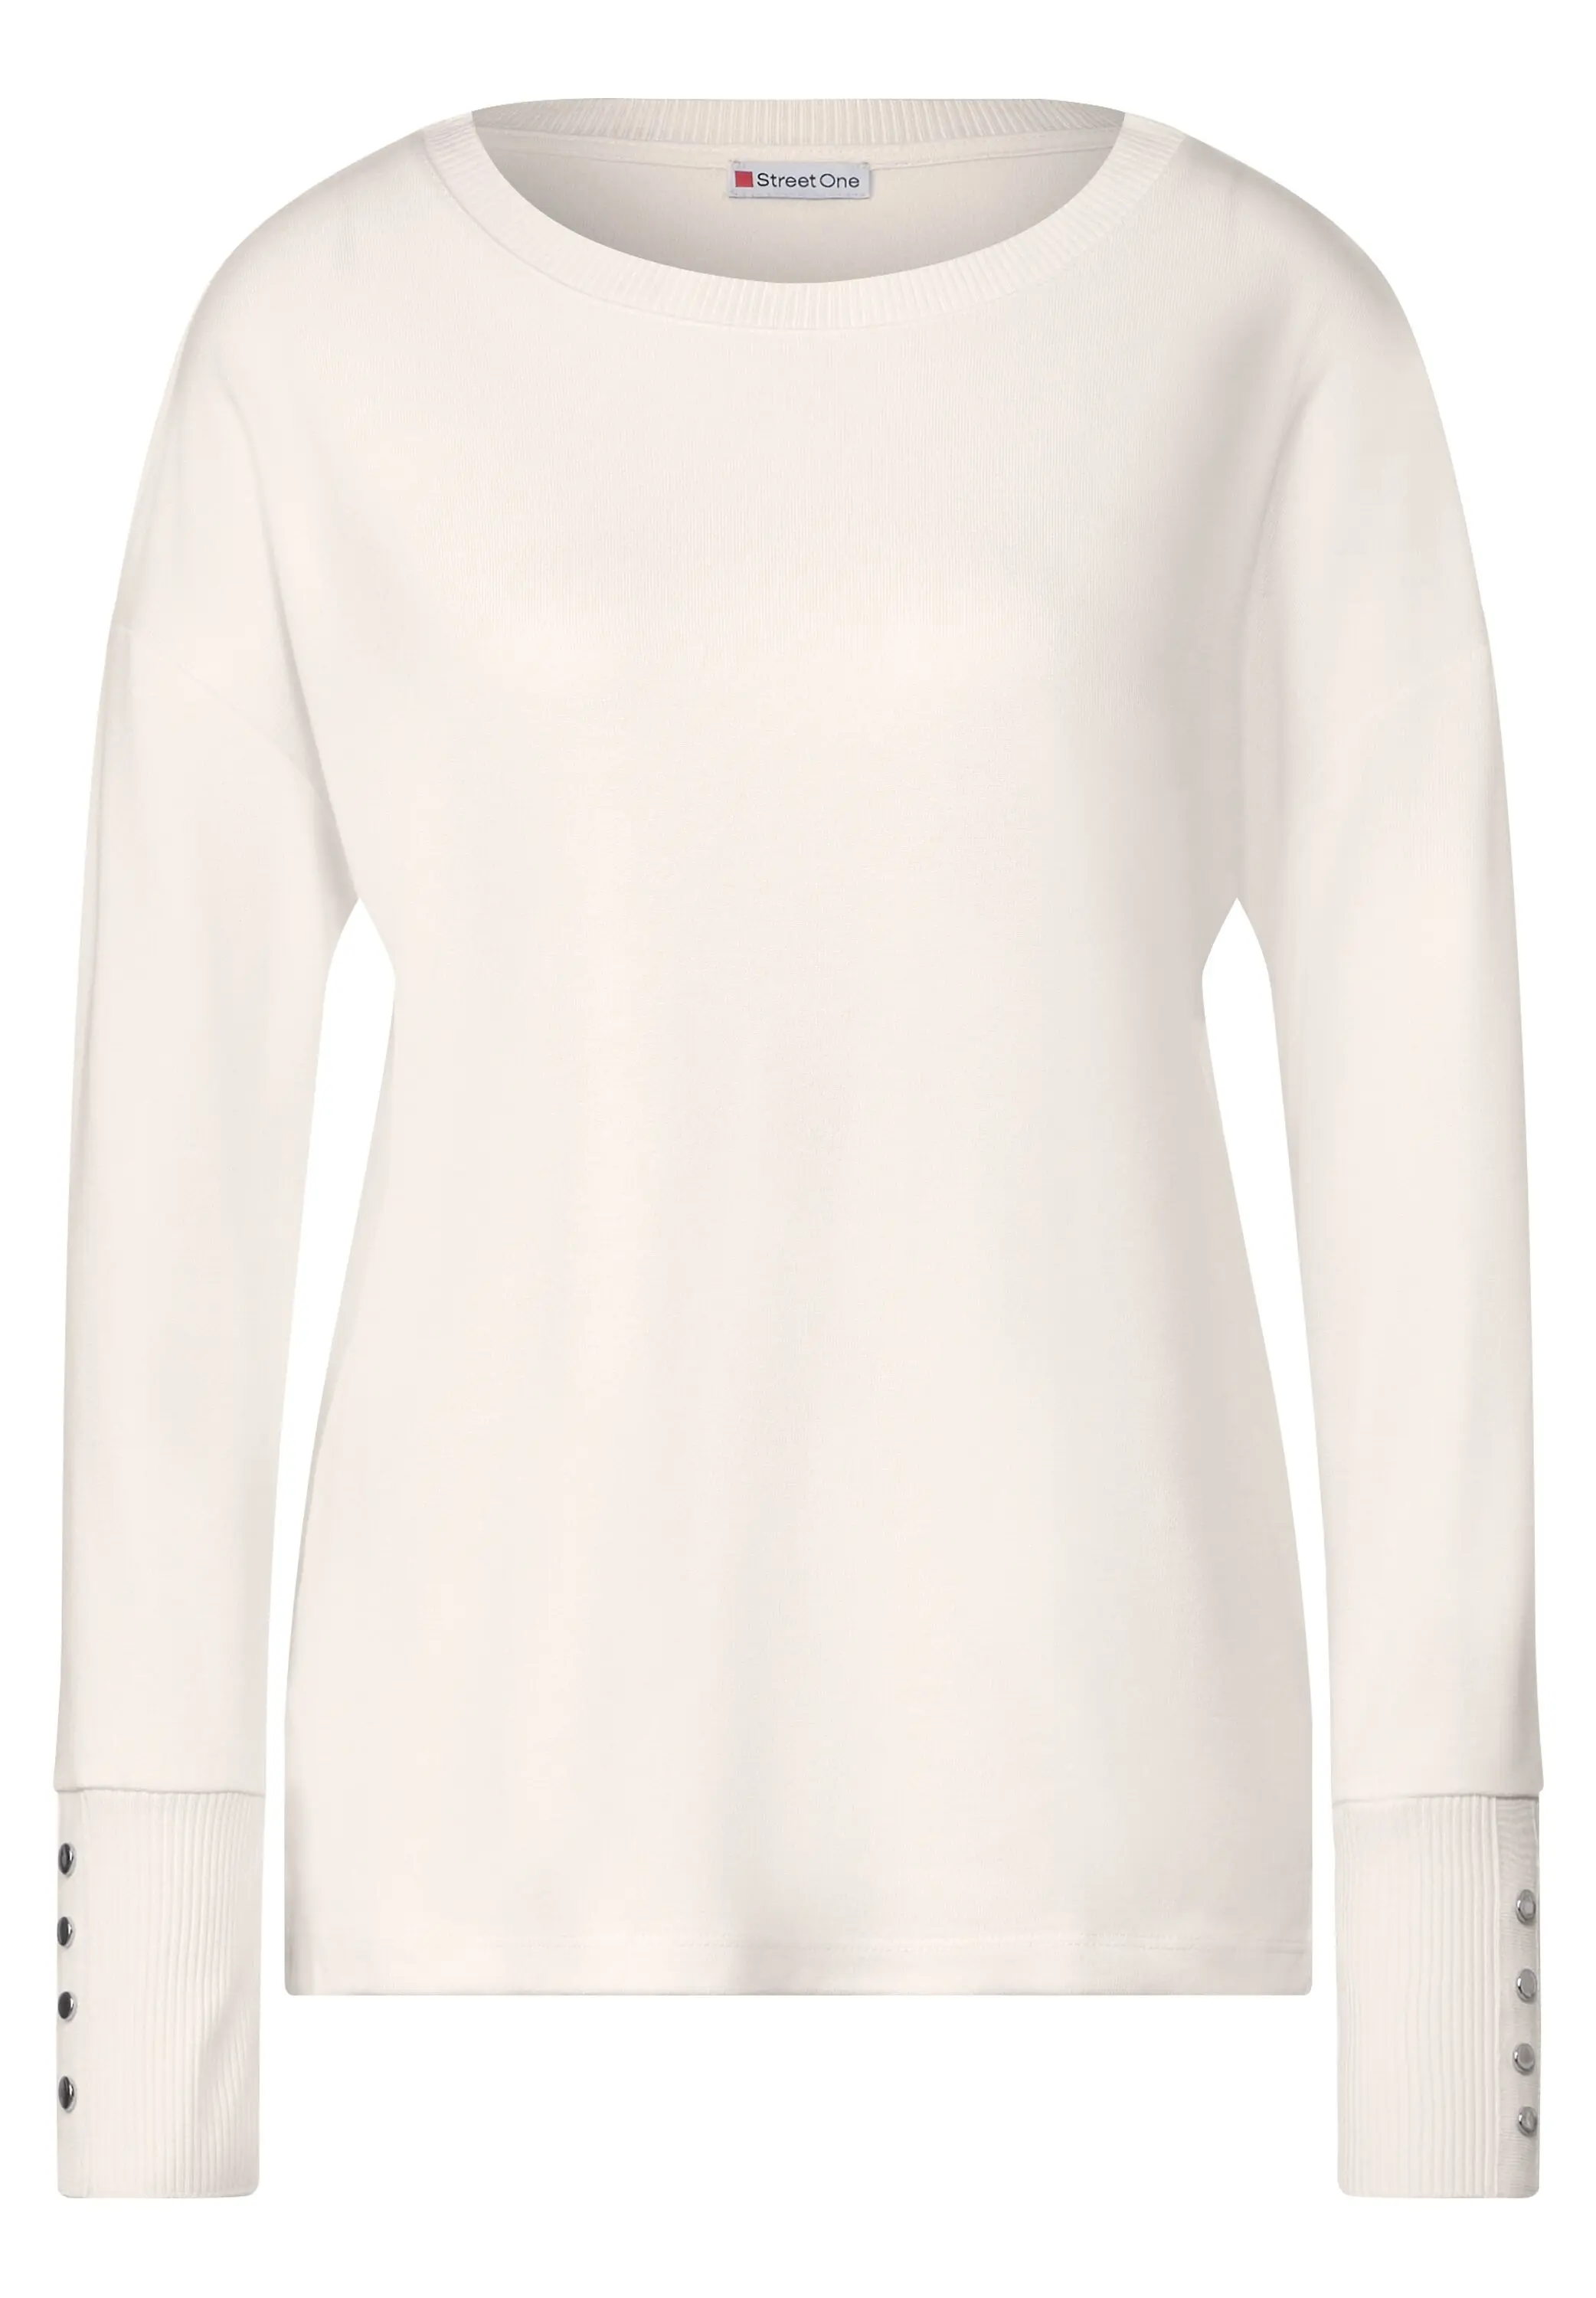 Street One Shirt mit Knopfdetail | | lucid 34 white